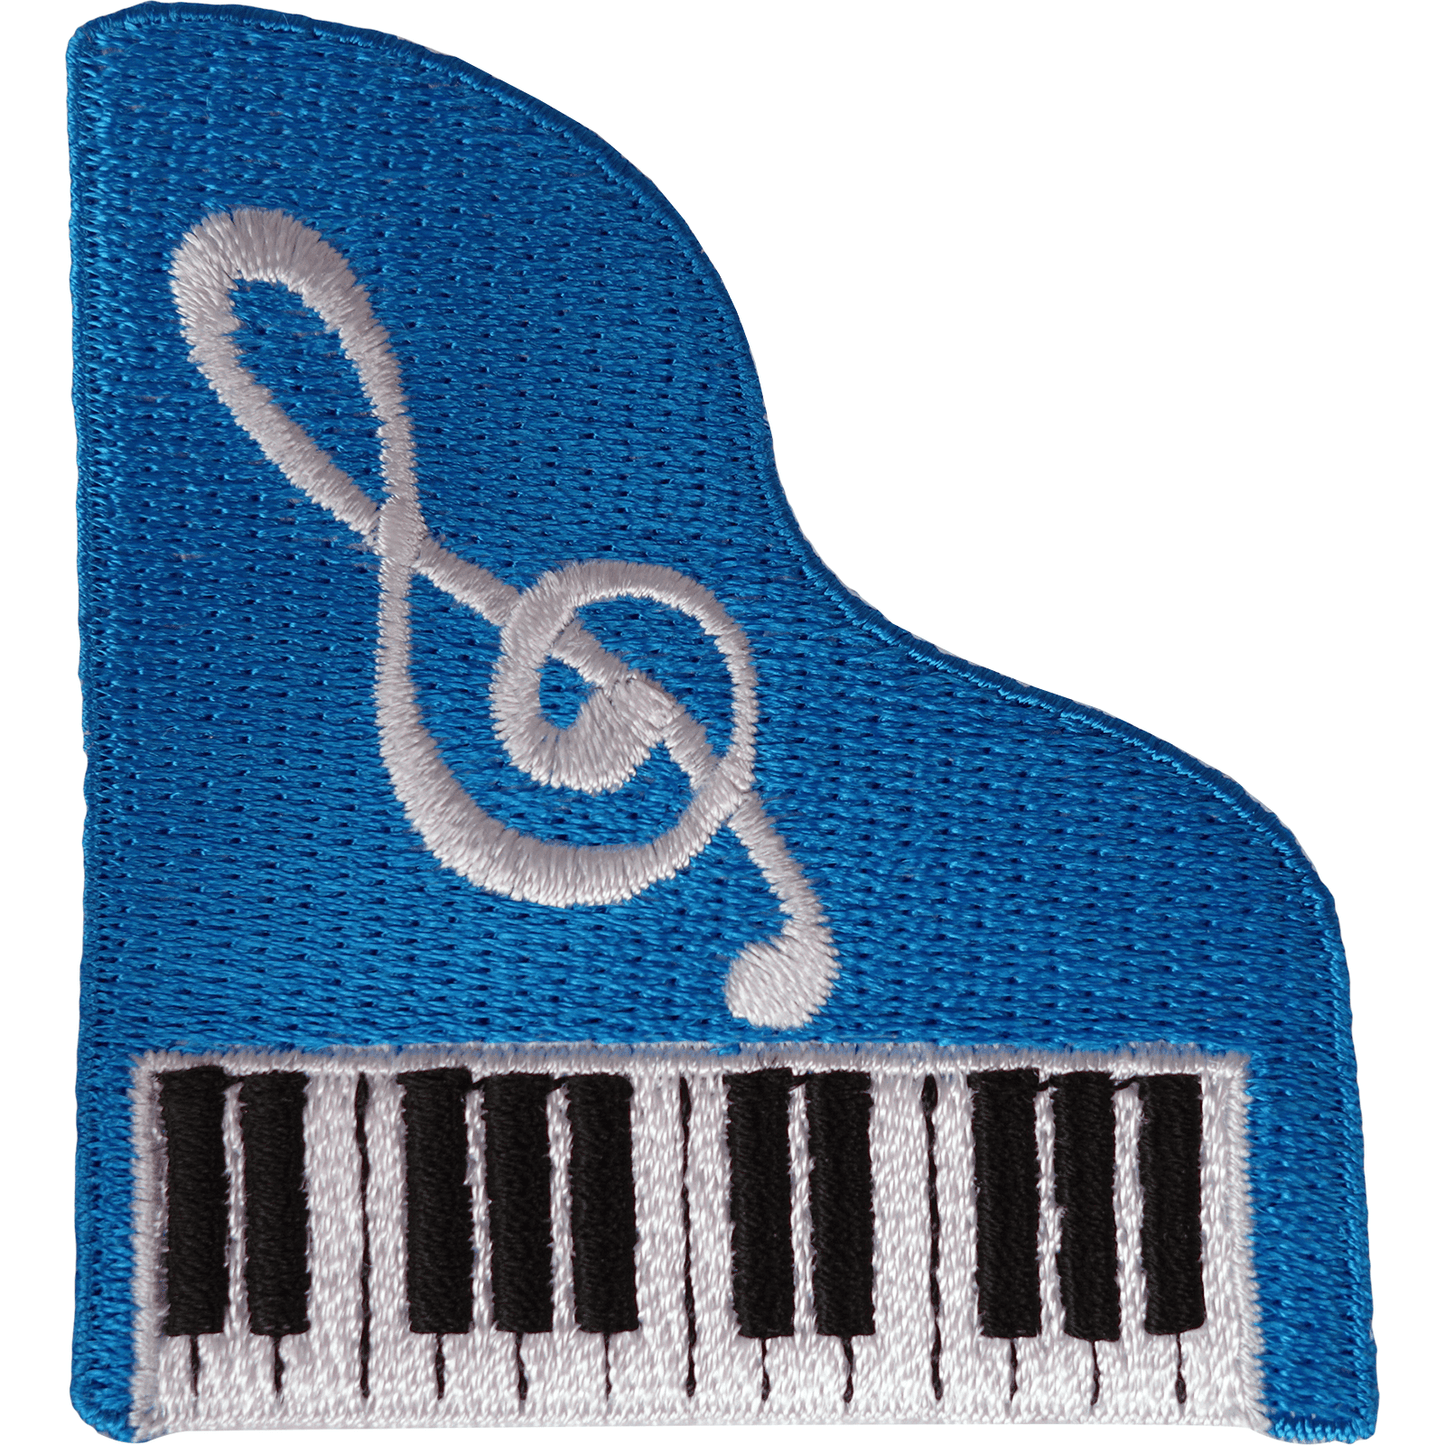 Piano Patch Iron Sew On Clothes Embroidered Badge Music Note Embroidery Applique